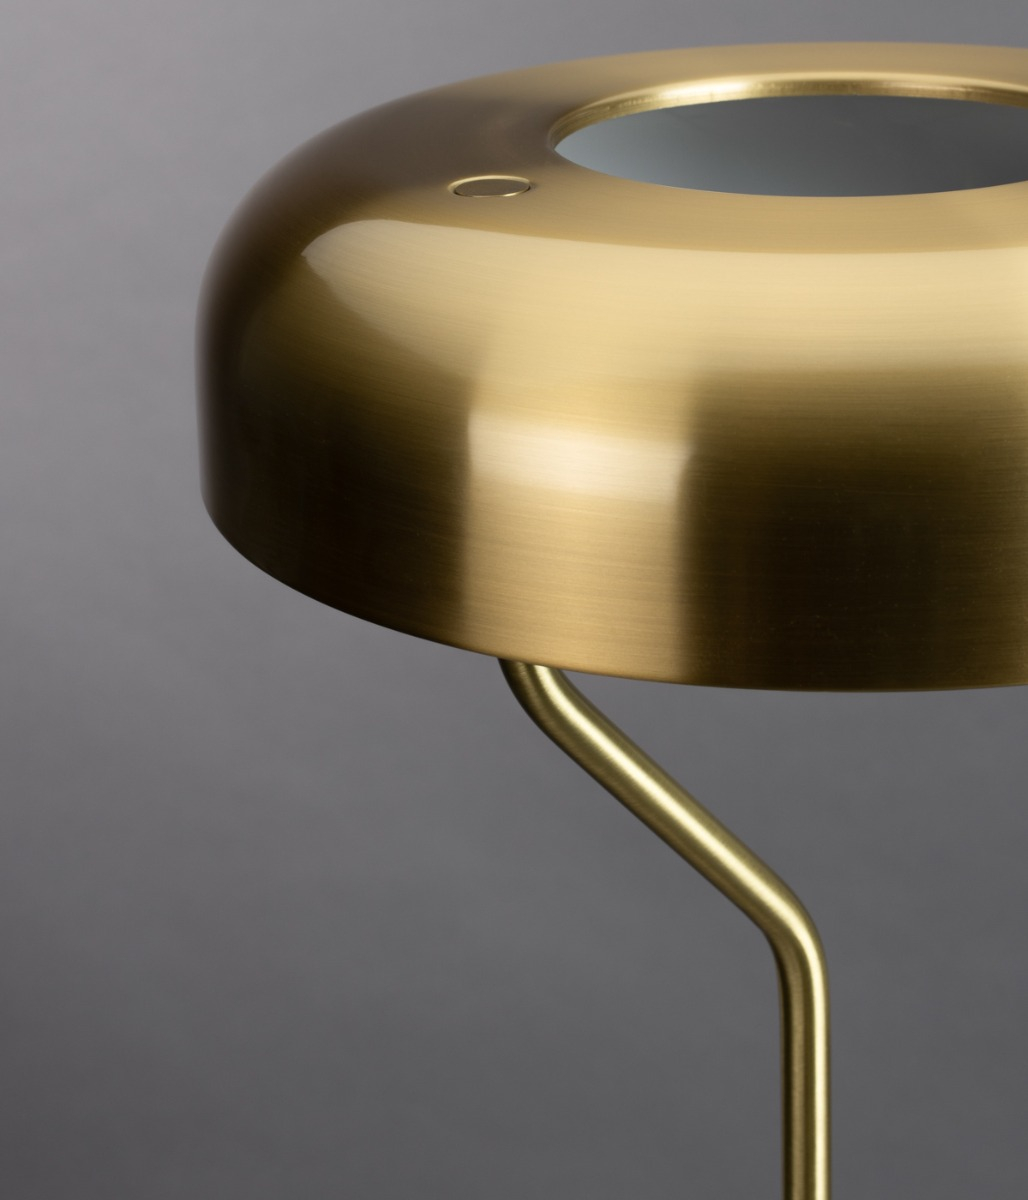 Eclipse Table Lamp Brass